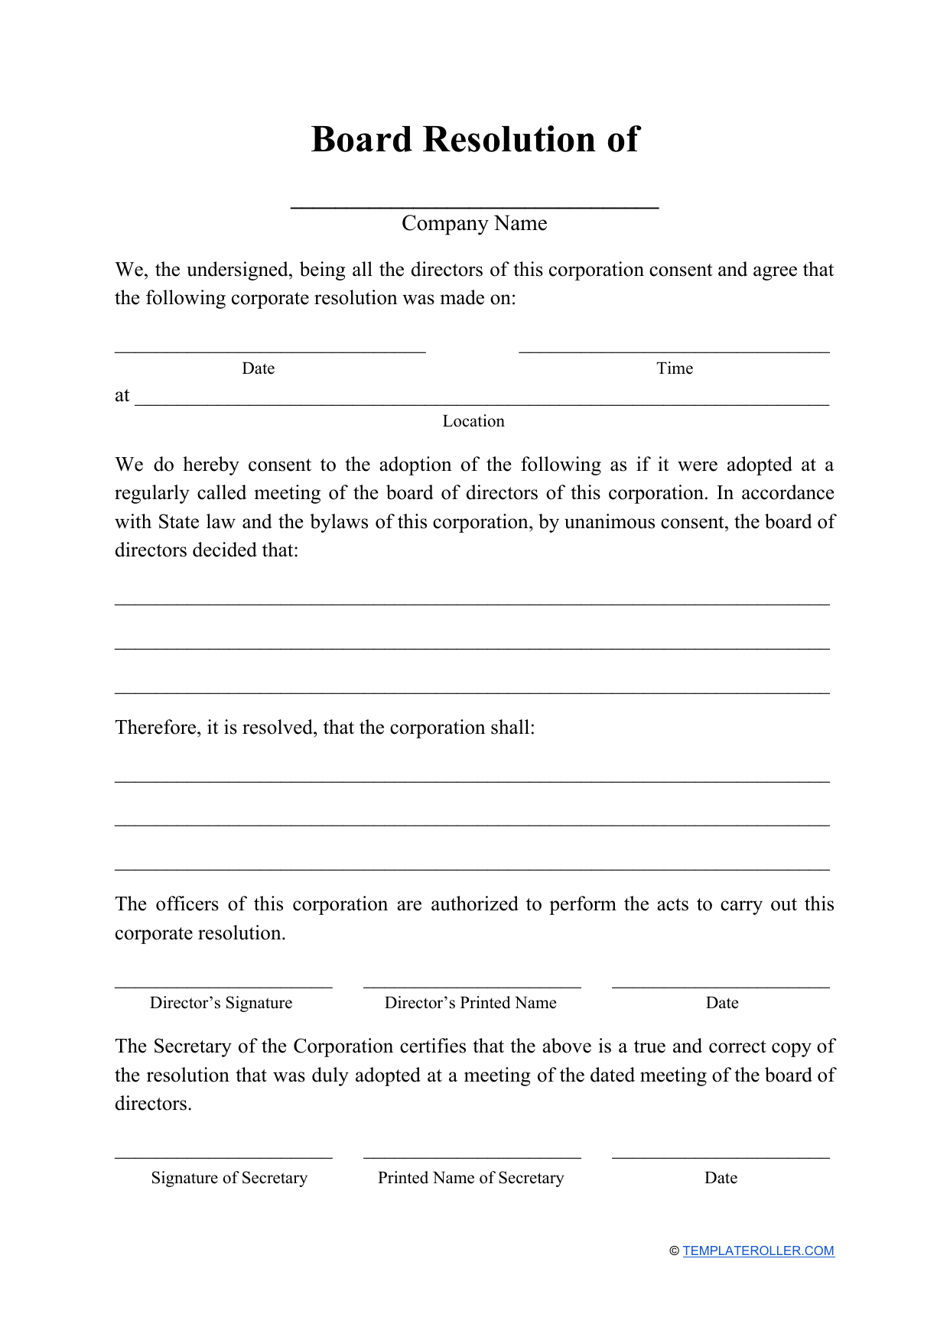 Board Resolution Template, Page 1